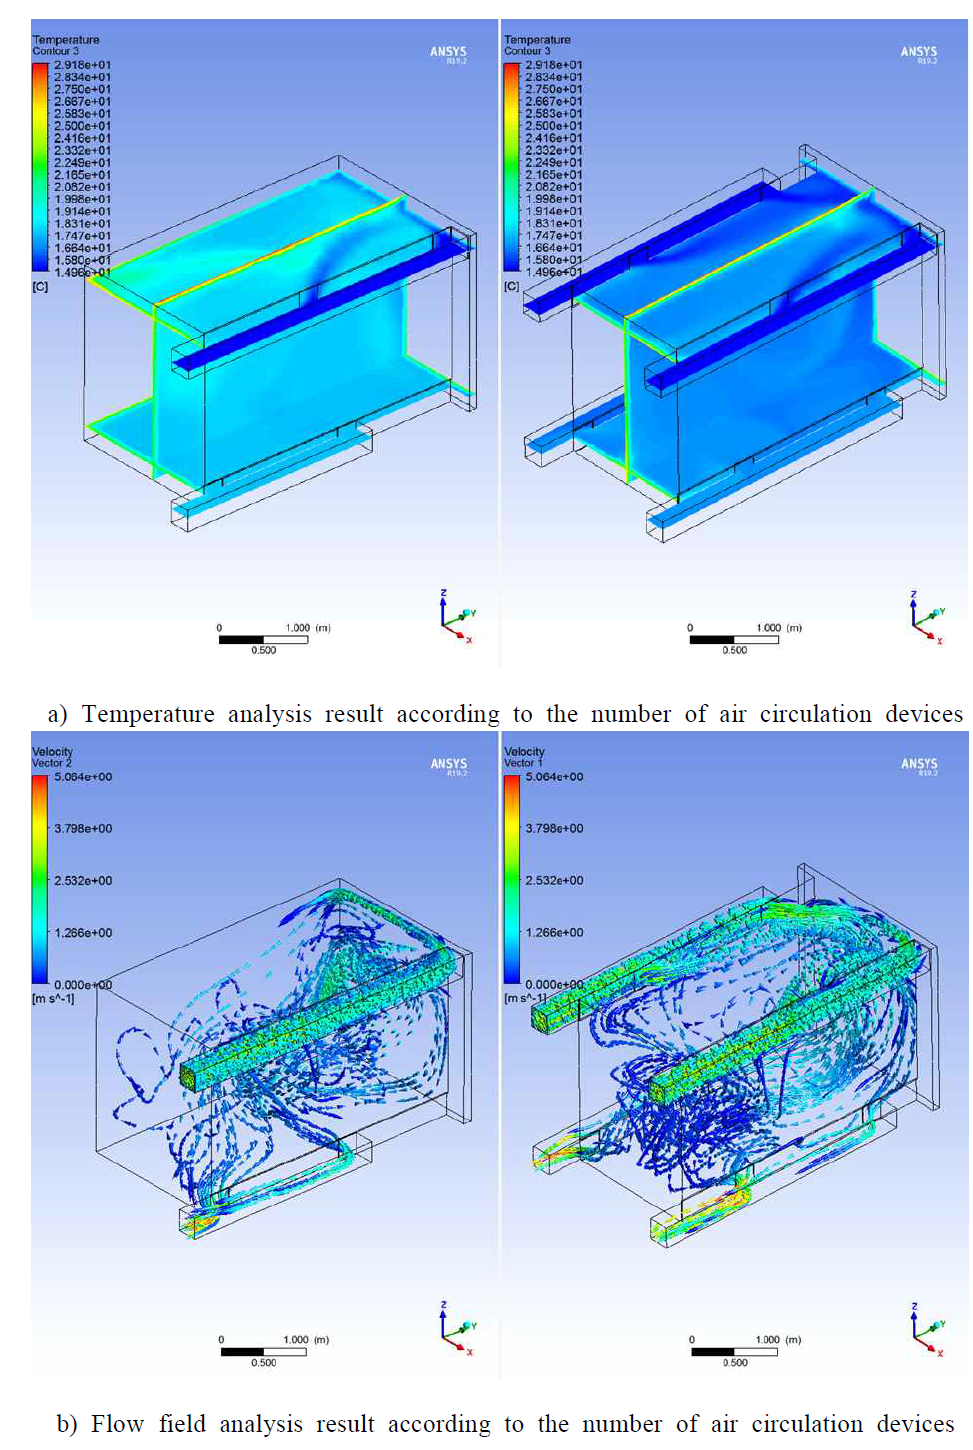 CFD (Computational fluid dynamics) analysis result according to the number of air circulation devices (Summer)